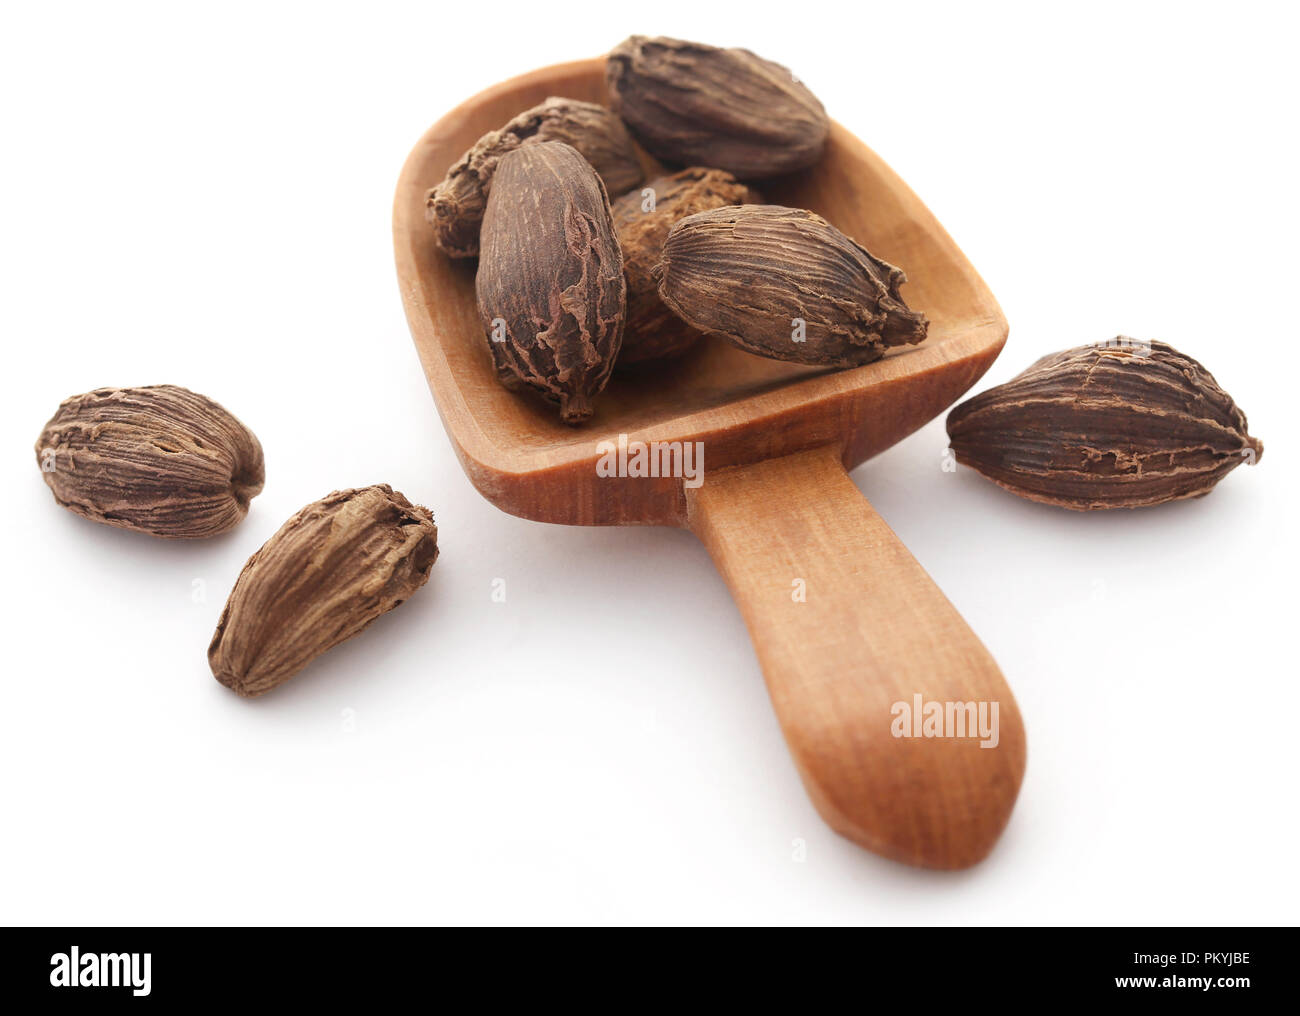 Black cardamom in wooden scoop over white background Stock Photo